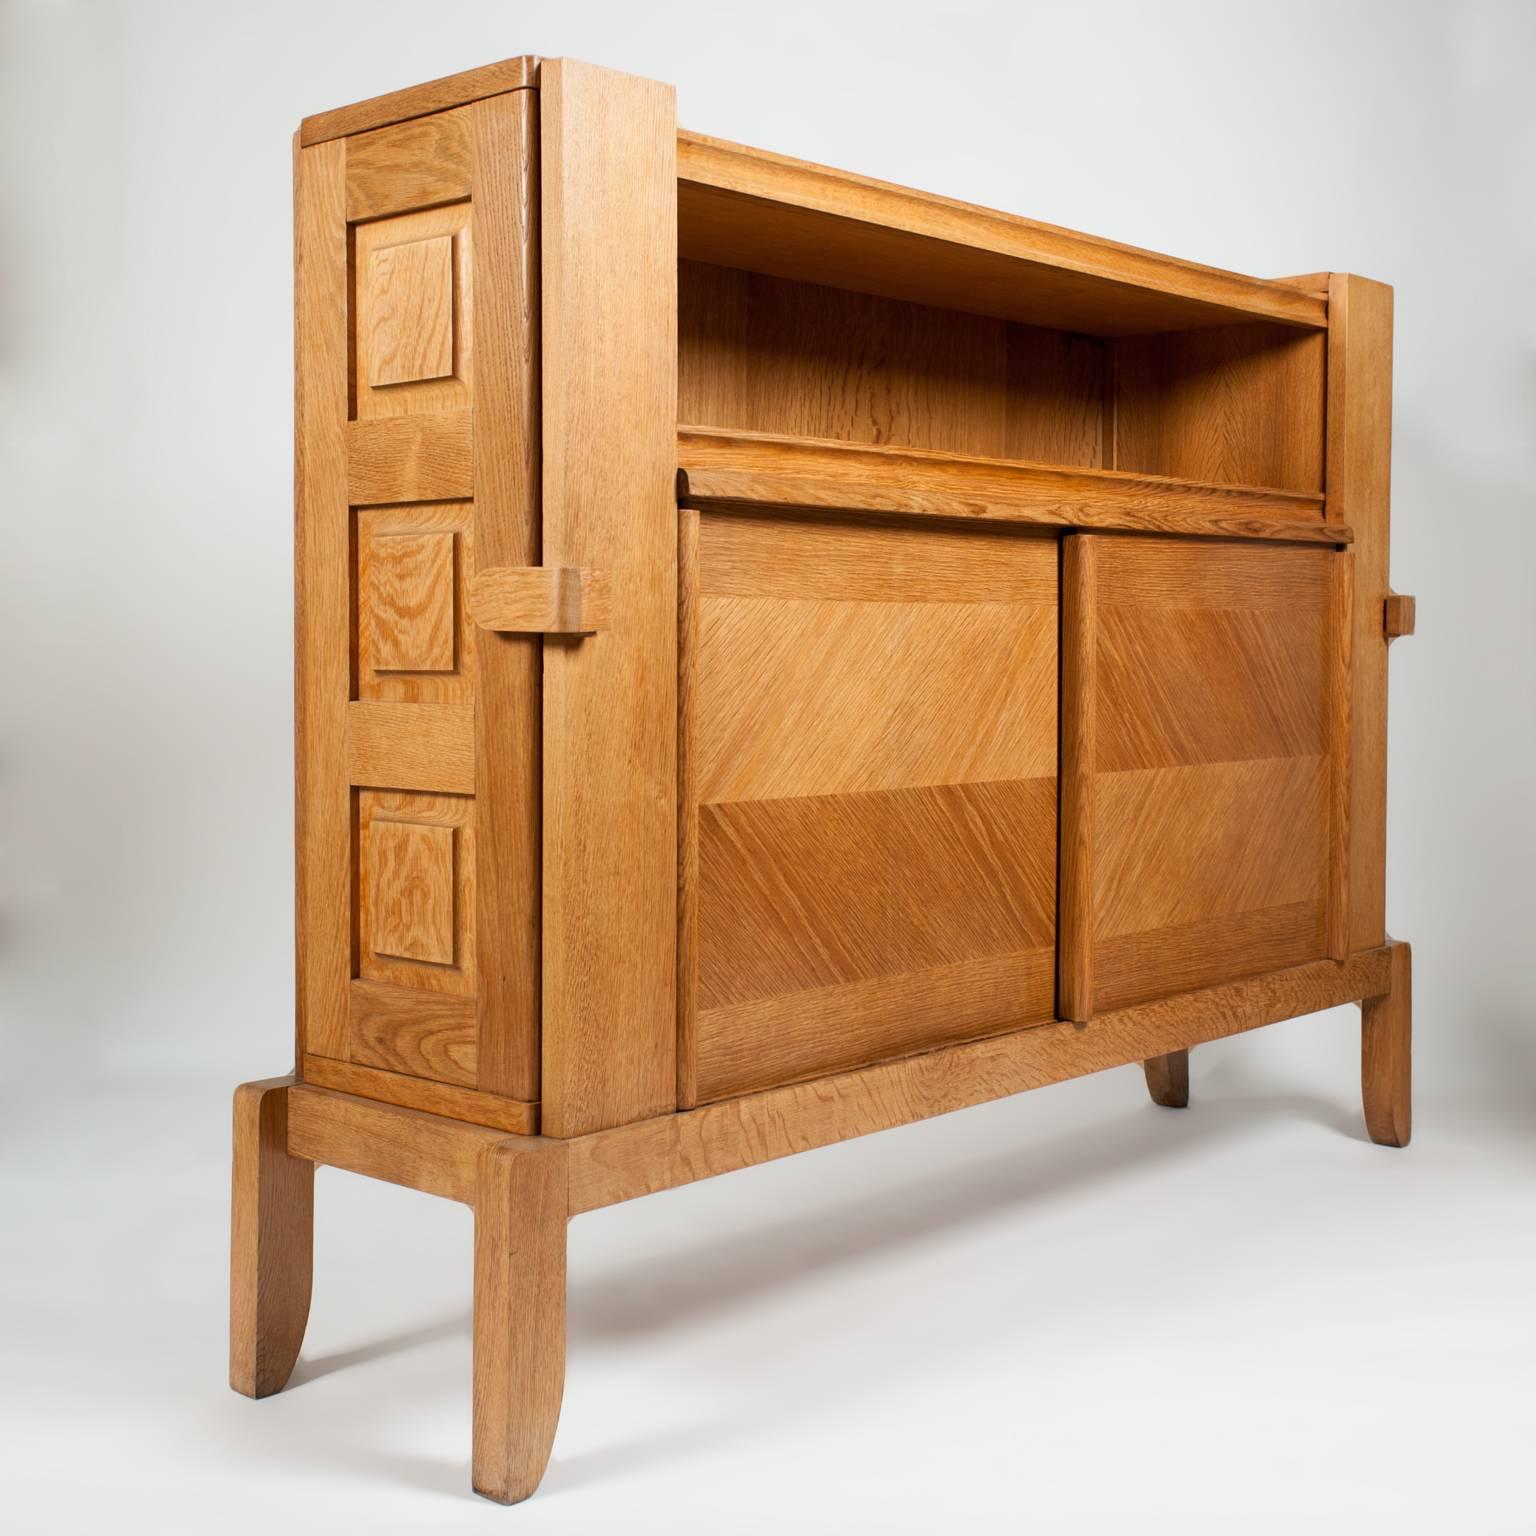 Sideboard designed by Guillerme et Chambron in solid oak with beautiful patina, with side doors that hide small shelves, central space with two sliding doors.